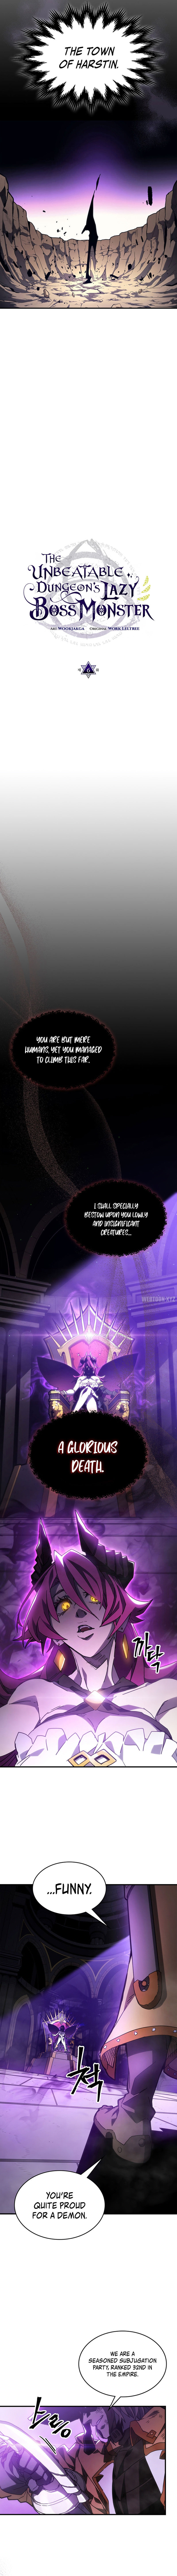 Mr Devourer, Please Act Like a Final Boss - Chapter 6 Page 3